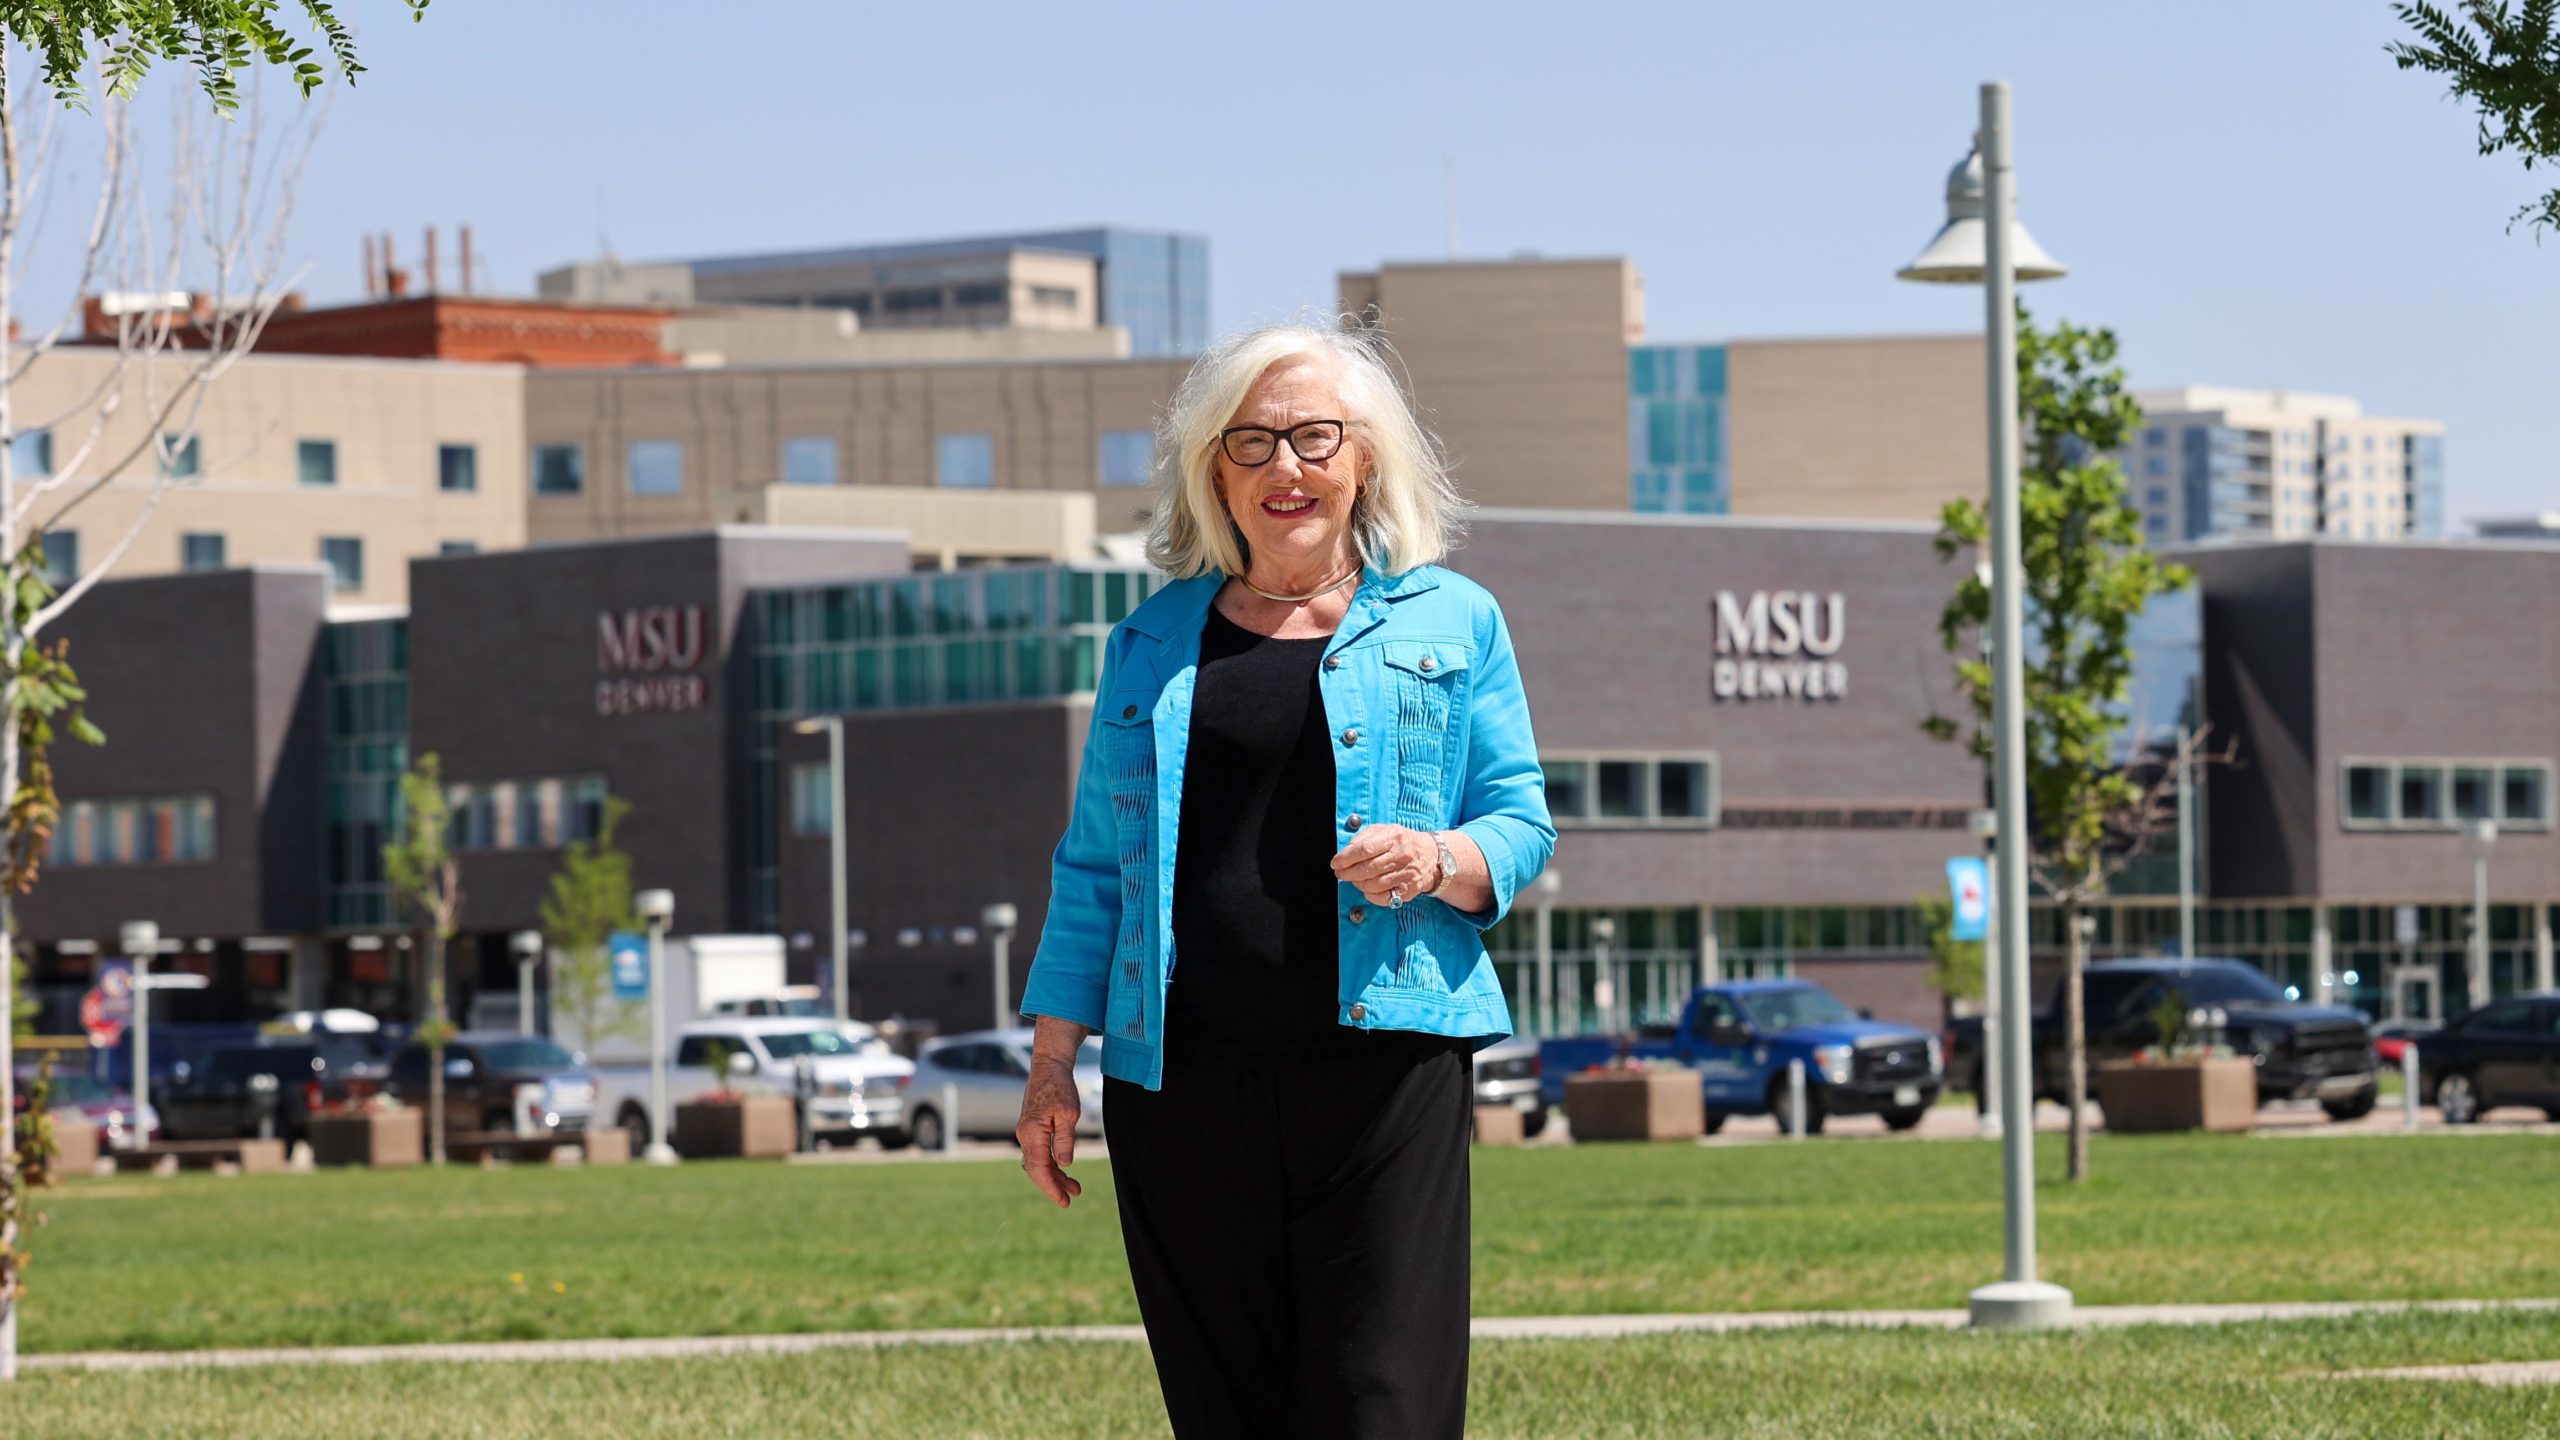 Barb Grogan standing near the Tivoli with the SpringHill Suites in the background